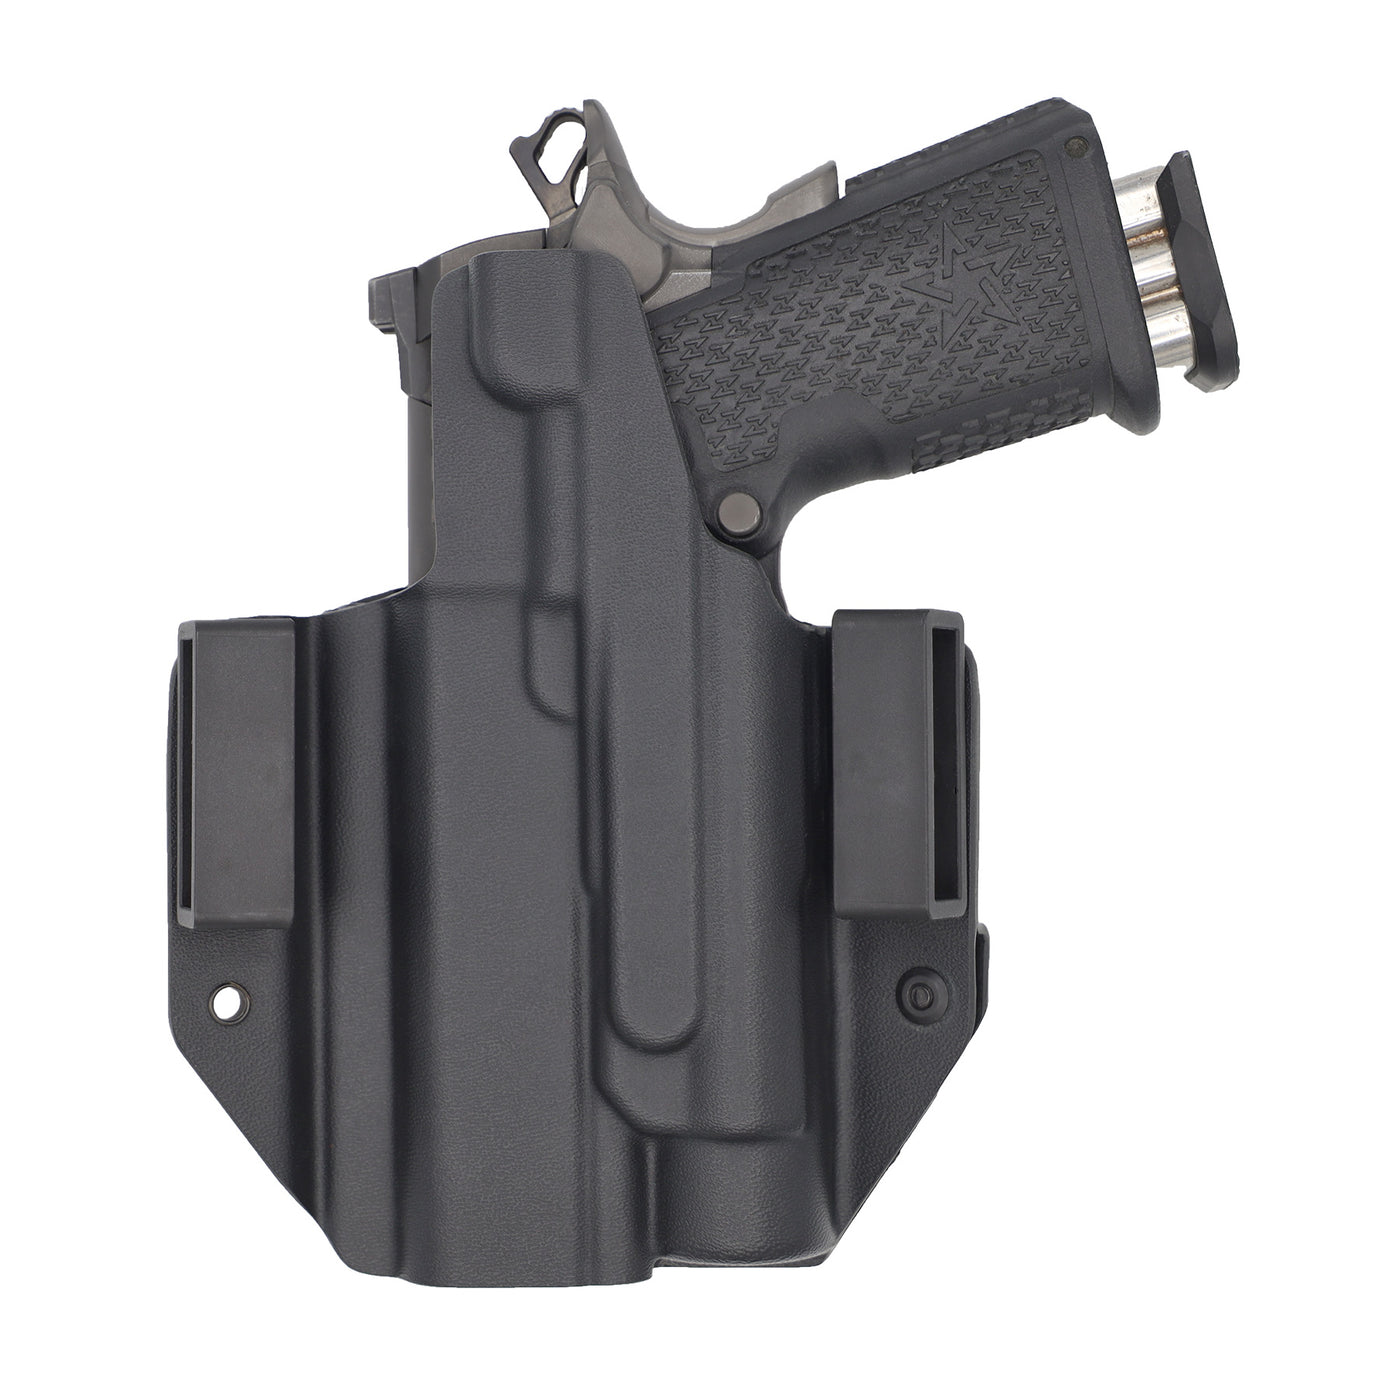 C&G Holsters custom OWB tactical staccato TLR1 in holstered position back view